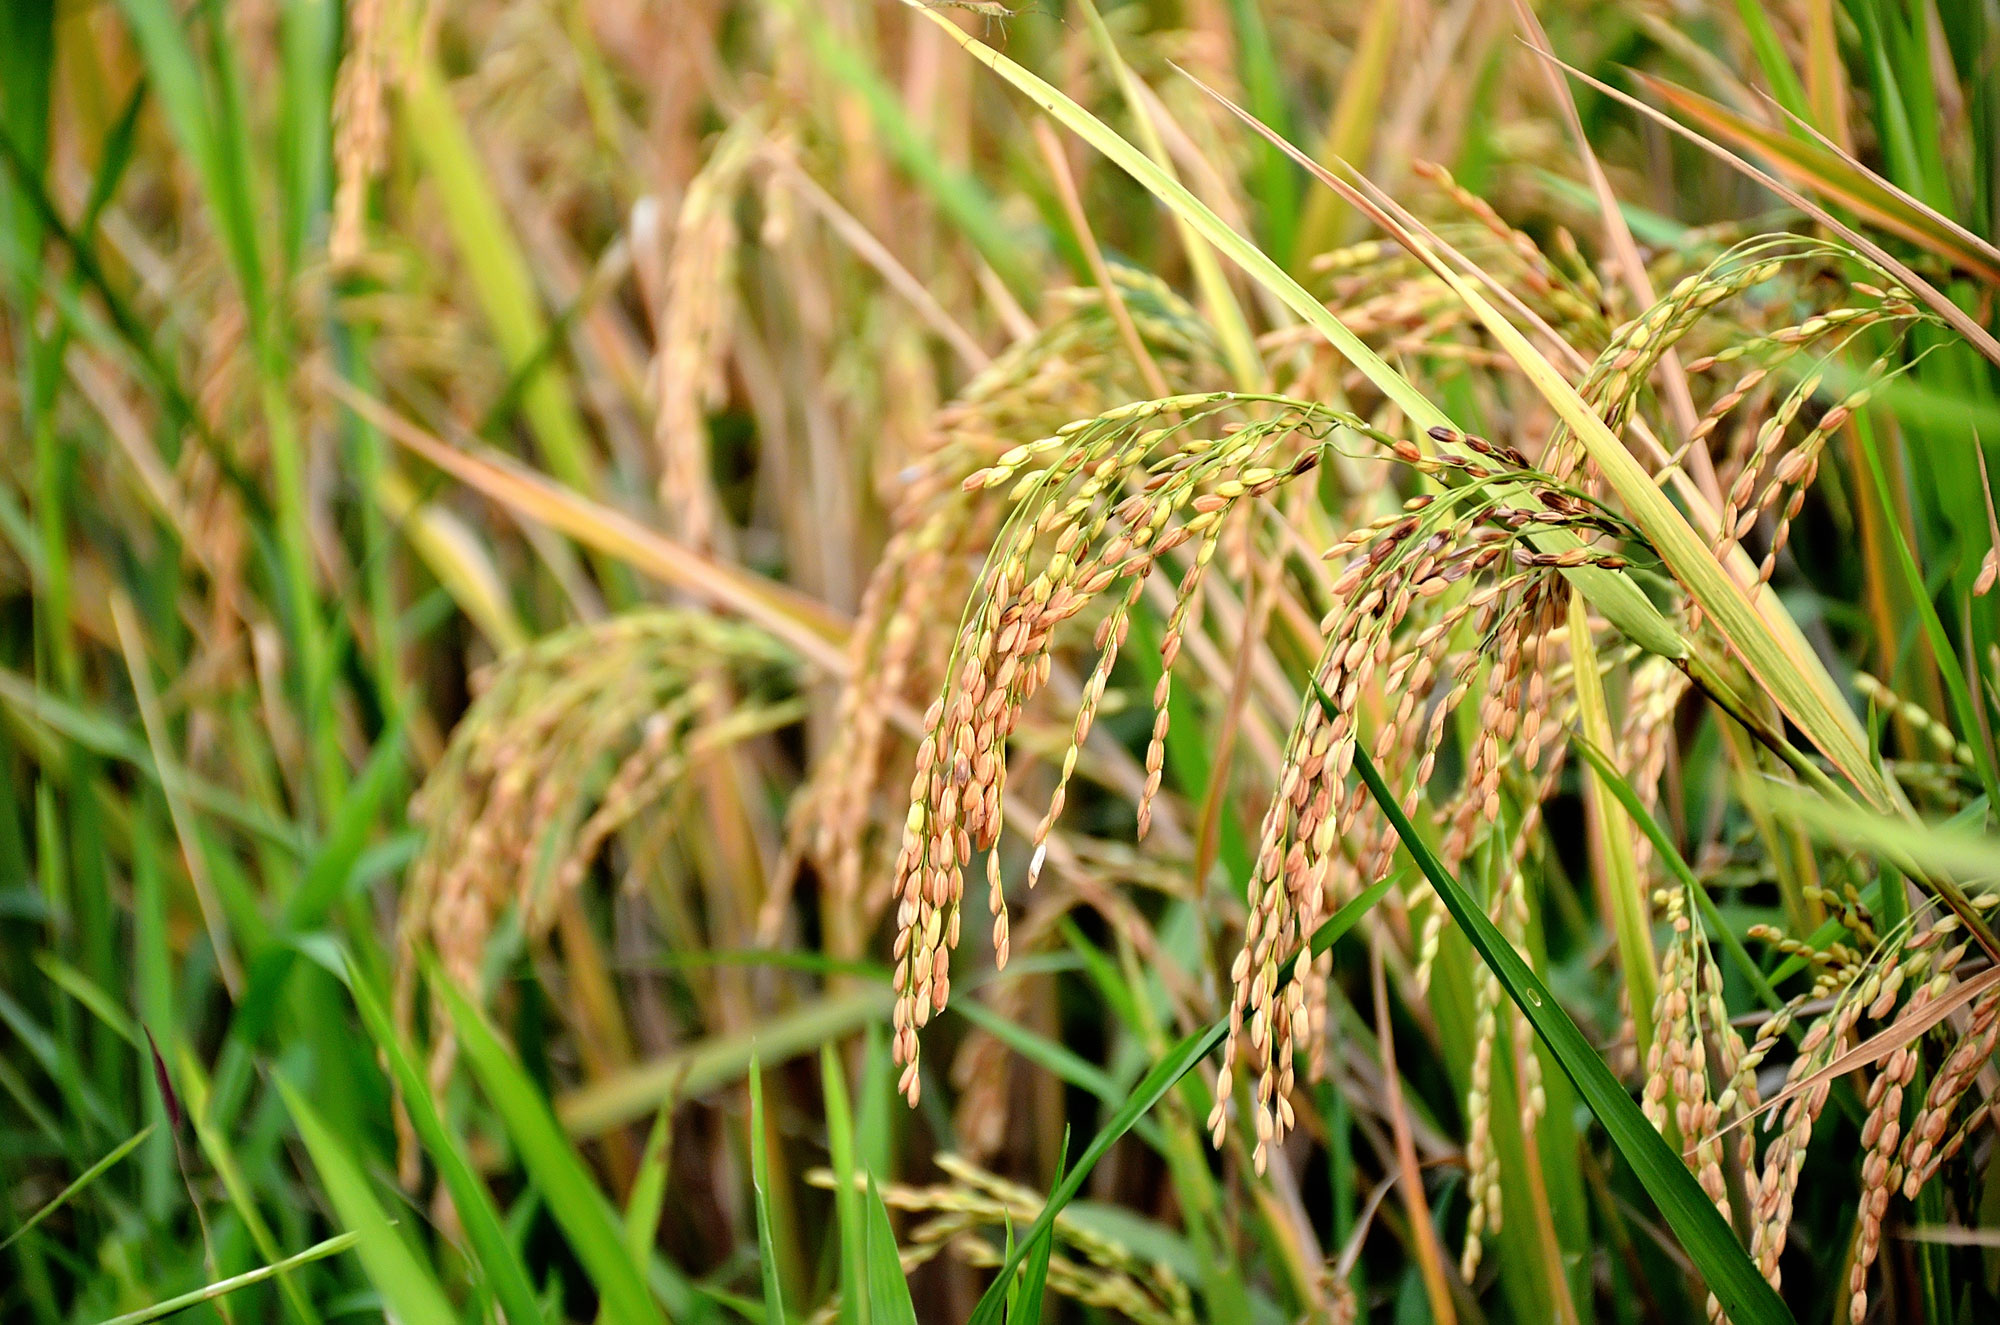 Photograph of inflorescences of cultivated rice. The photos shows inflorescences with green and light brown spikelets hanging down off the ends of the rice plants.